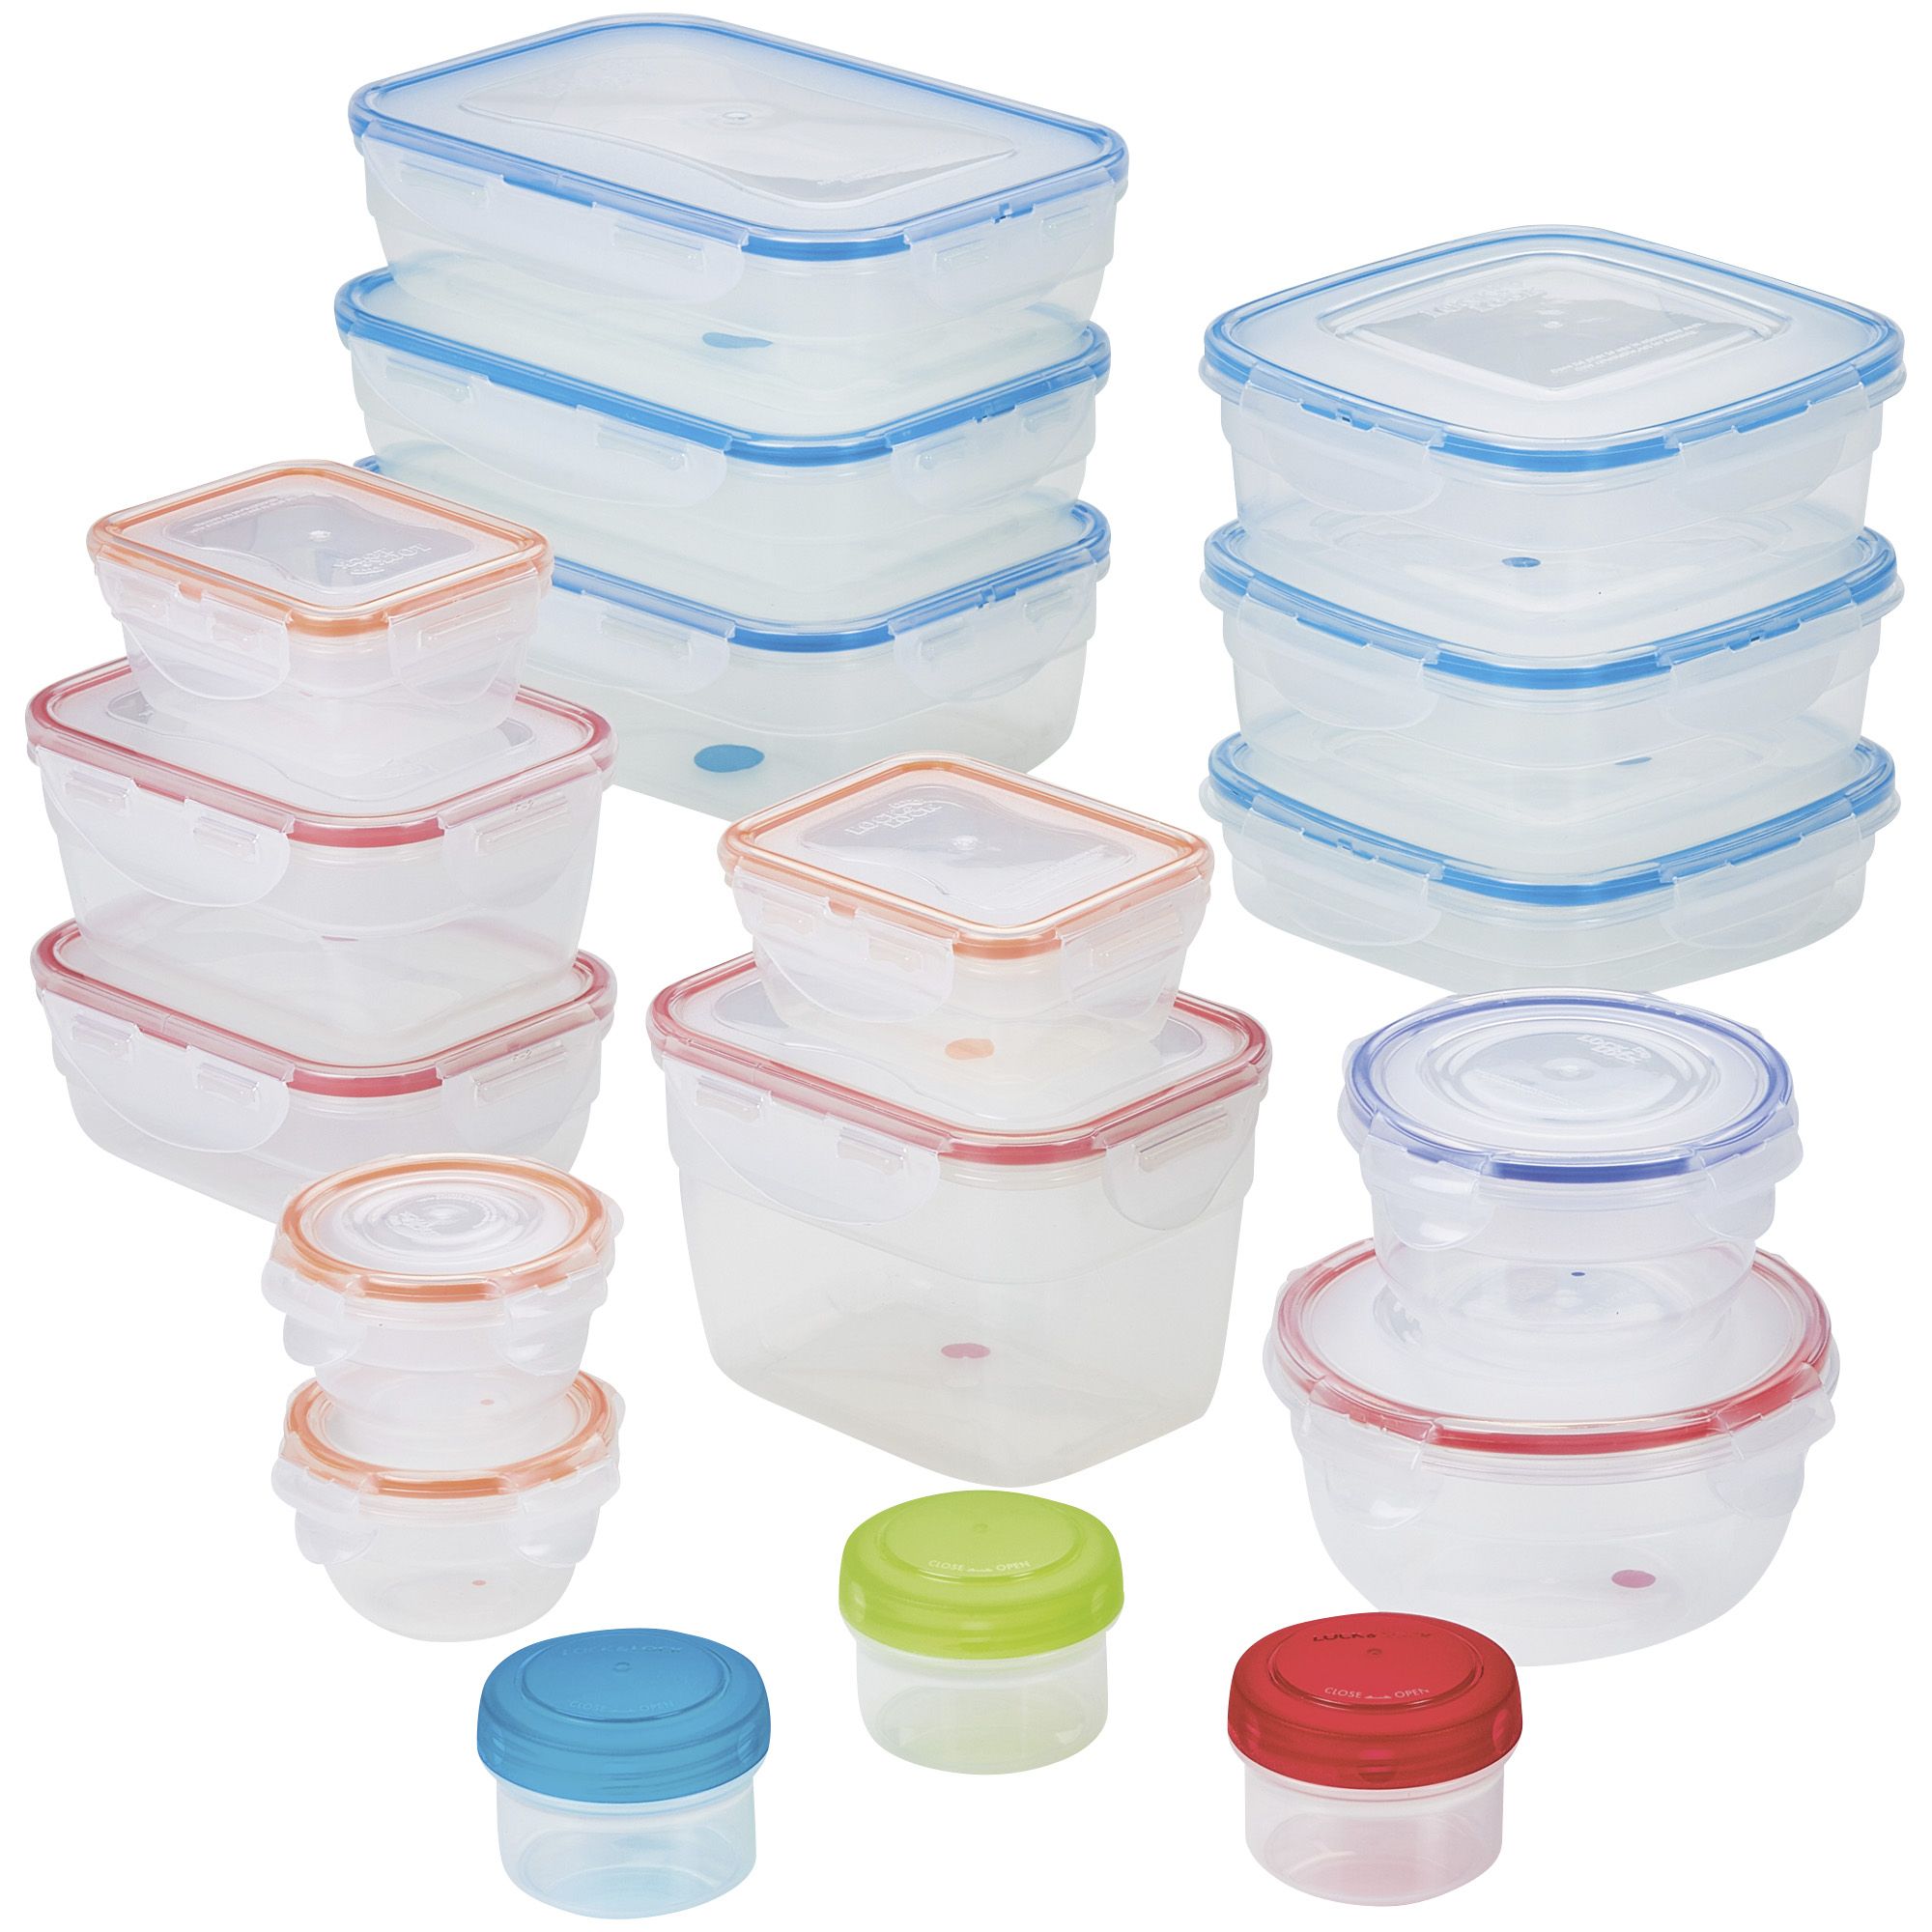 Tupperware New Black Halloween Nesting Containers With Lids 6 Piece